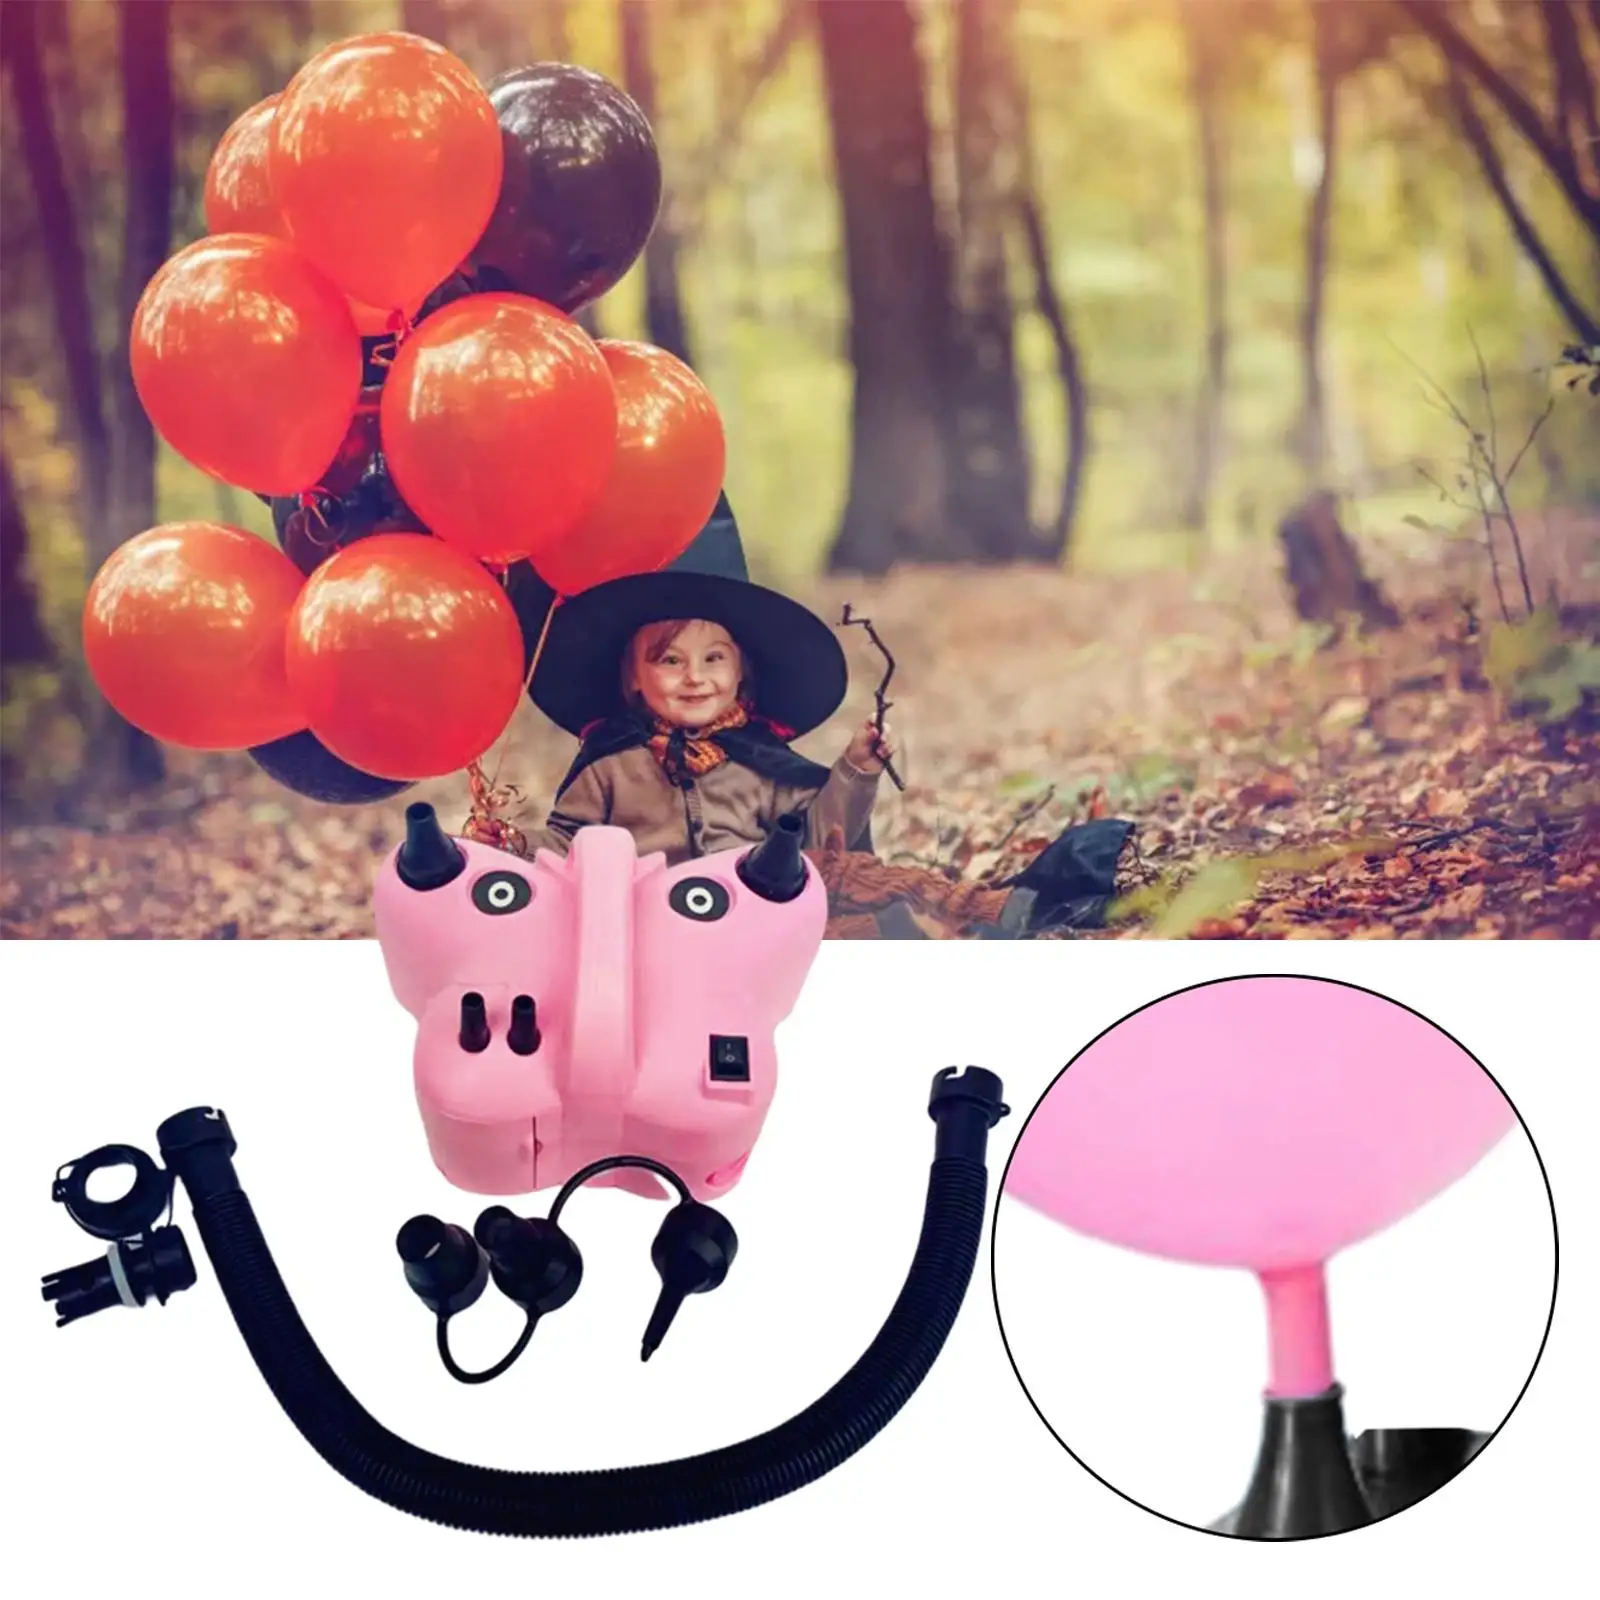 Portable Electric Balloon Inflator Pump Manual and Automatic Pumping Mode for Ballon Arch Garland Rubber Boat Floating Tube